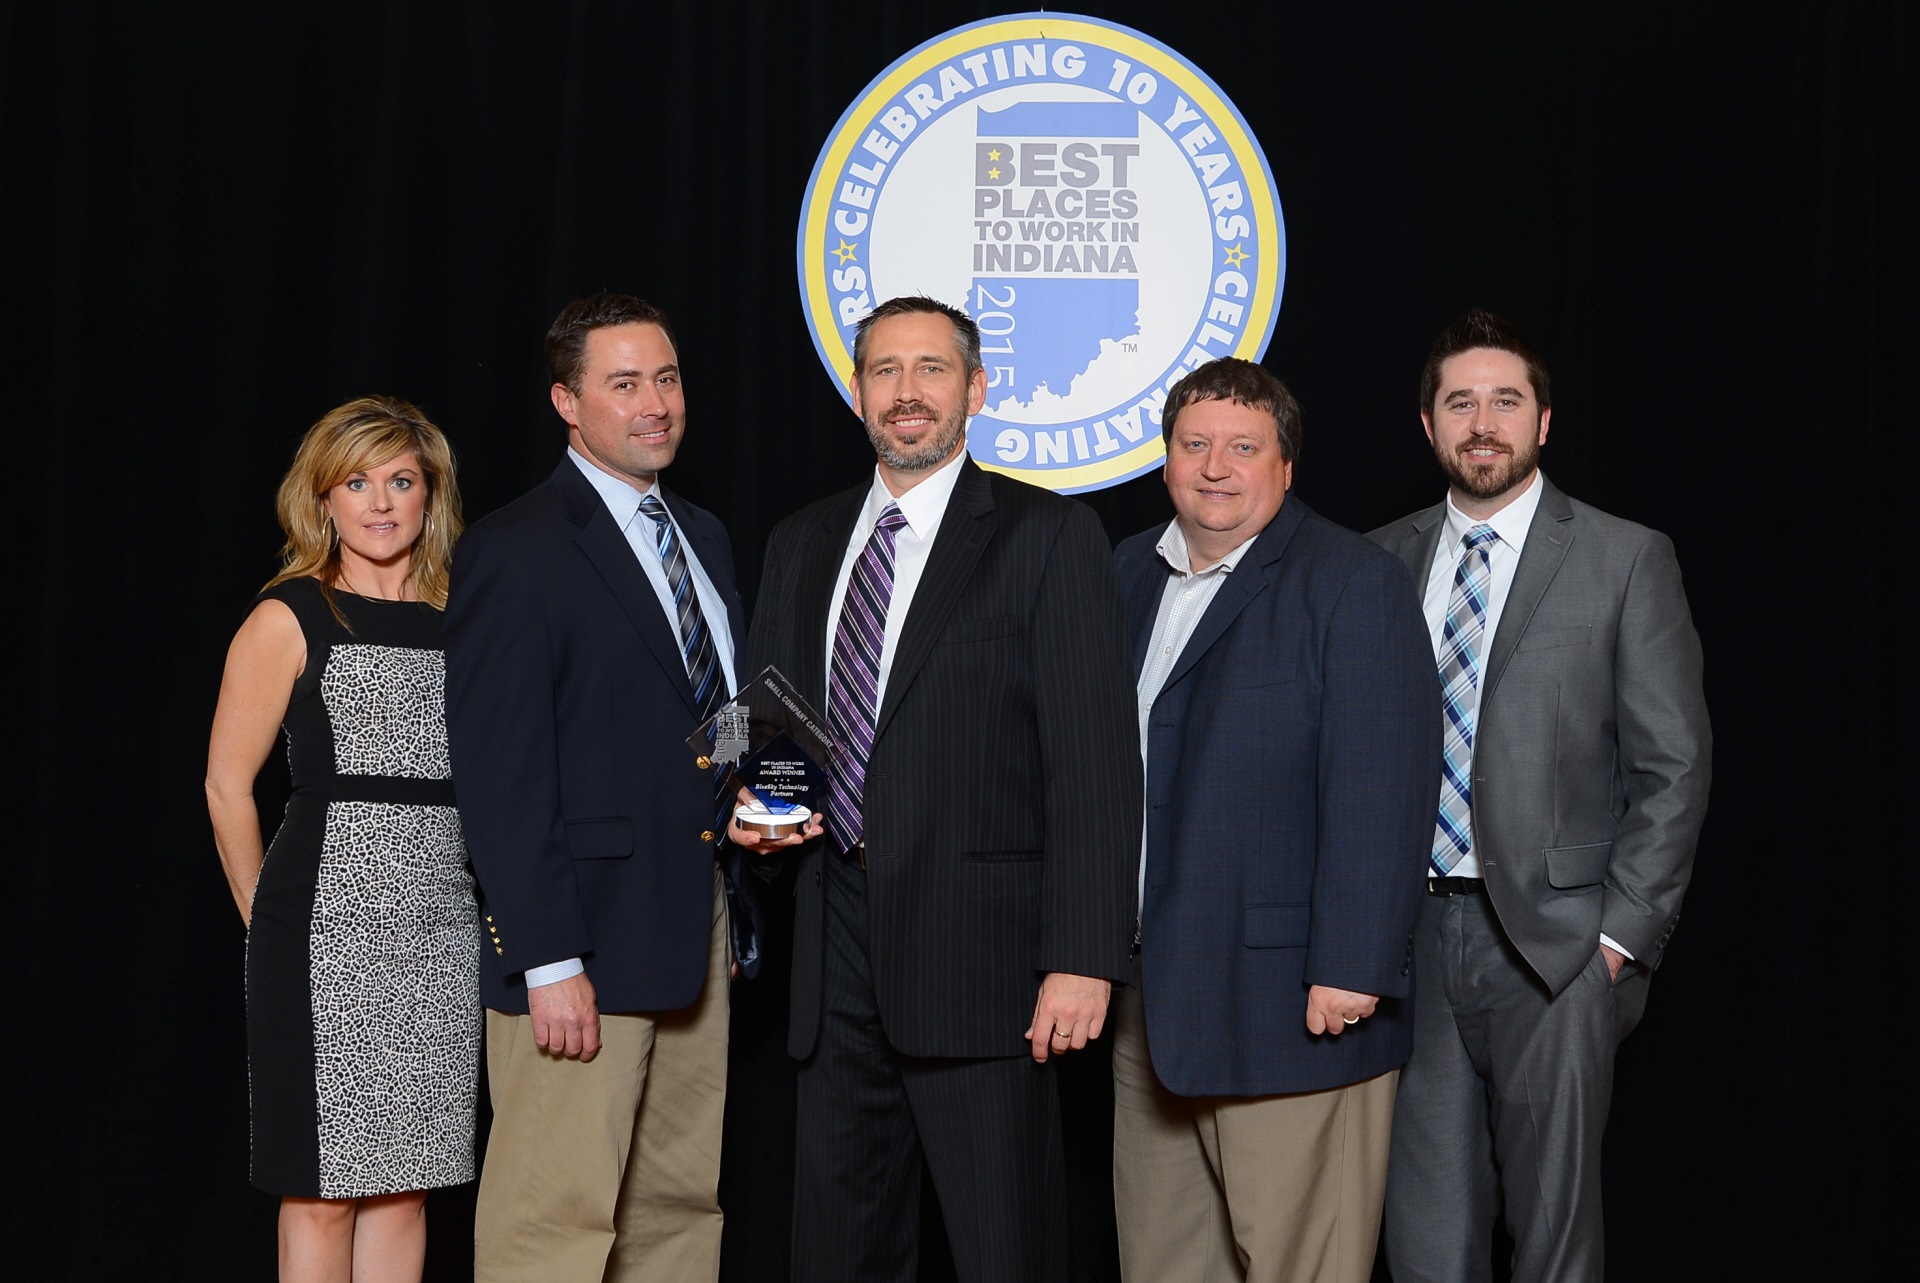 Bluesky technology partners - best places to work in indiana 2015